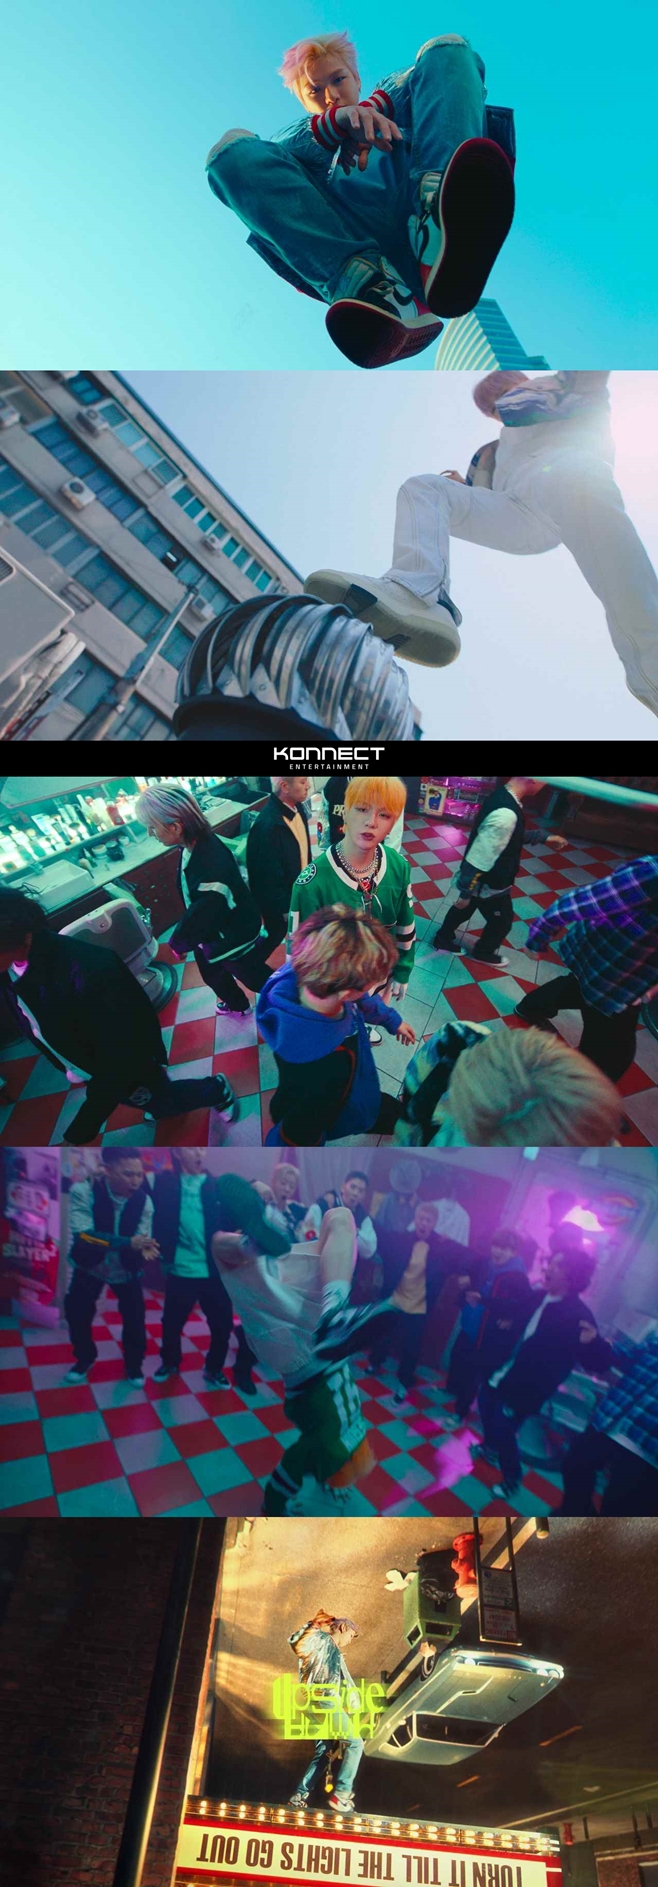 Kang Daniel returns to the most Kang DanielDown title track.Connected Entertainment released a music video teaser video of Upside Down on its official SNS at 0:00 on Sunday.Just a day before the comeback, it is the key point part of the title song that took off the veil.The video, which began with the song Turn Upside Down and was a combination of the charm of Upside Down. Street Bboying Performance was quickly and dynamically expressed.Kang Daniels light, bright and colorful atmosphere is full.Especially, the high-stakes Rainbow performance, which rotates 360 degrees in the air in place, caught the eye. The sound was also fascinated by the cool and exciting pop line.Guitar and driving synth pads added dramatic elements.Connected Entertainment said, It is an interesting song that coexists with a clear rose piano and heavy guitar sound. In addition, you will be able to feel a fresh and special rhythm by mixing drums, whistles and applause.At the end of the teaser, Kang Daniel is also impressed with the turning step on the upside down world, raising expectations for the main music video as much as Music.Kang Daniels new album The Story, which is released in 13 months, is the first regular album of Solo debut with 10 songs.You can get a glimpse of the scale of the entire album by producing three songs of track video as well as the title song Music Video.The album The Story, which contains the music world of the evolved Kang Daniel, is released at 24 Days at 6 pm.